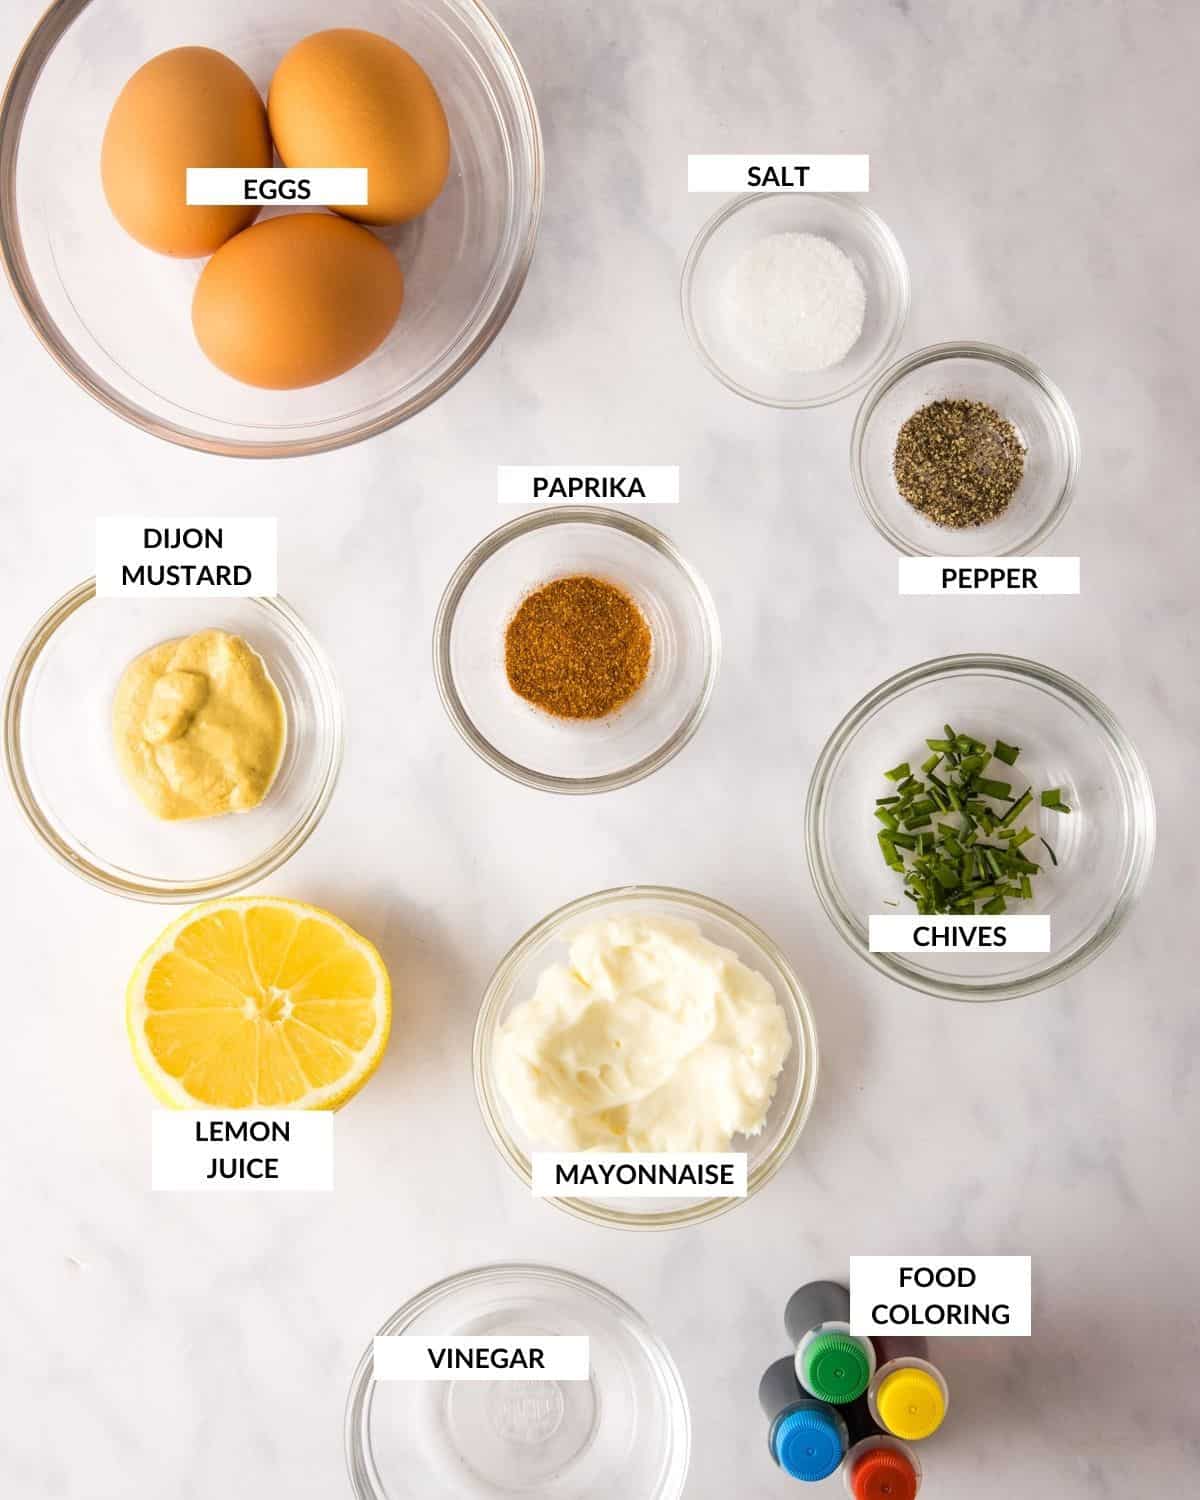 Labeled ingredient list for making colored or Easter deviled eggs - check recipe card for details!